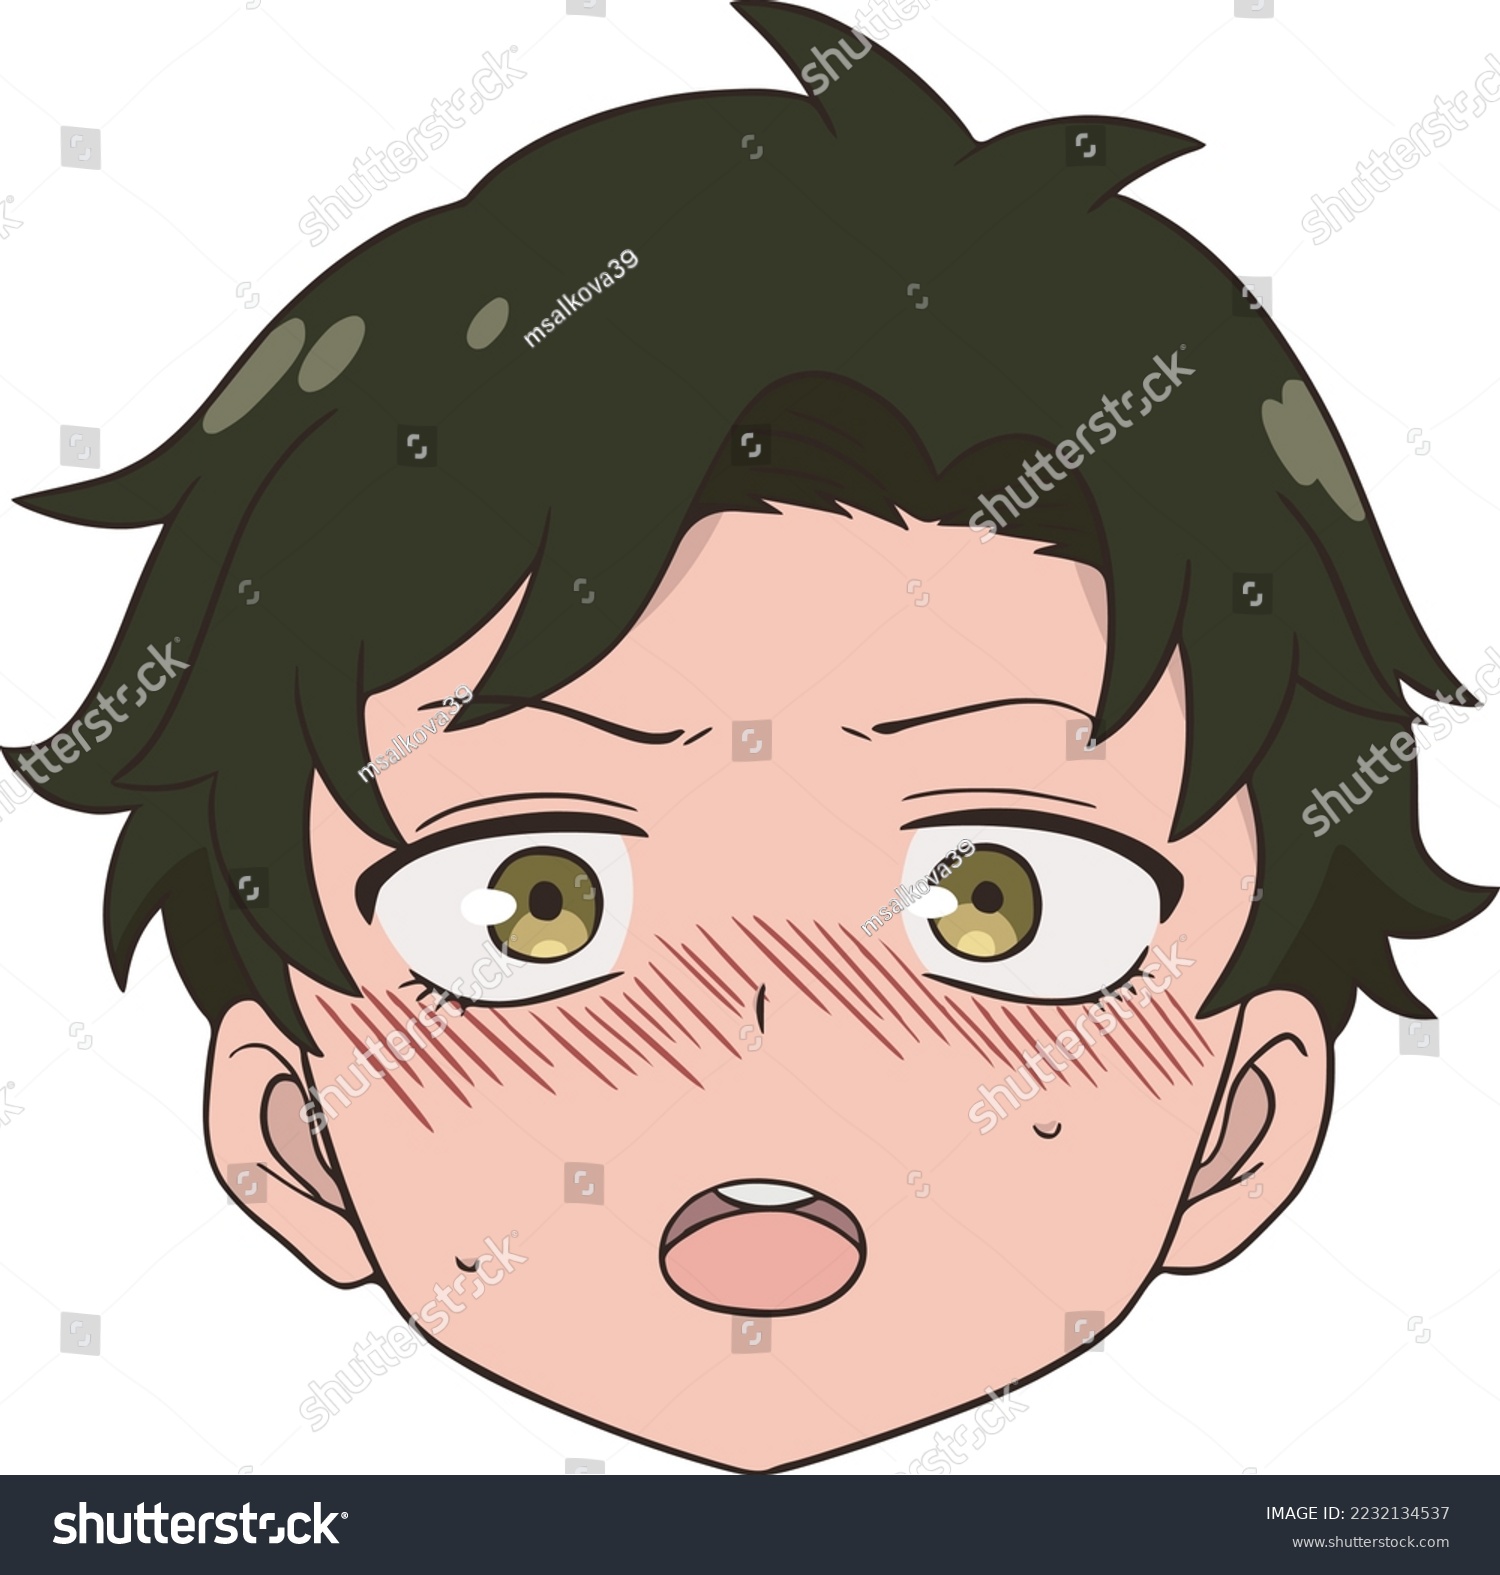 SVG of Boy with green hair and golden eyes, he looks straight ahead, embarrassed, red blush on his cheeks svg